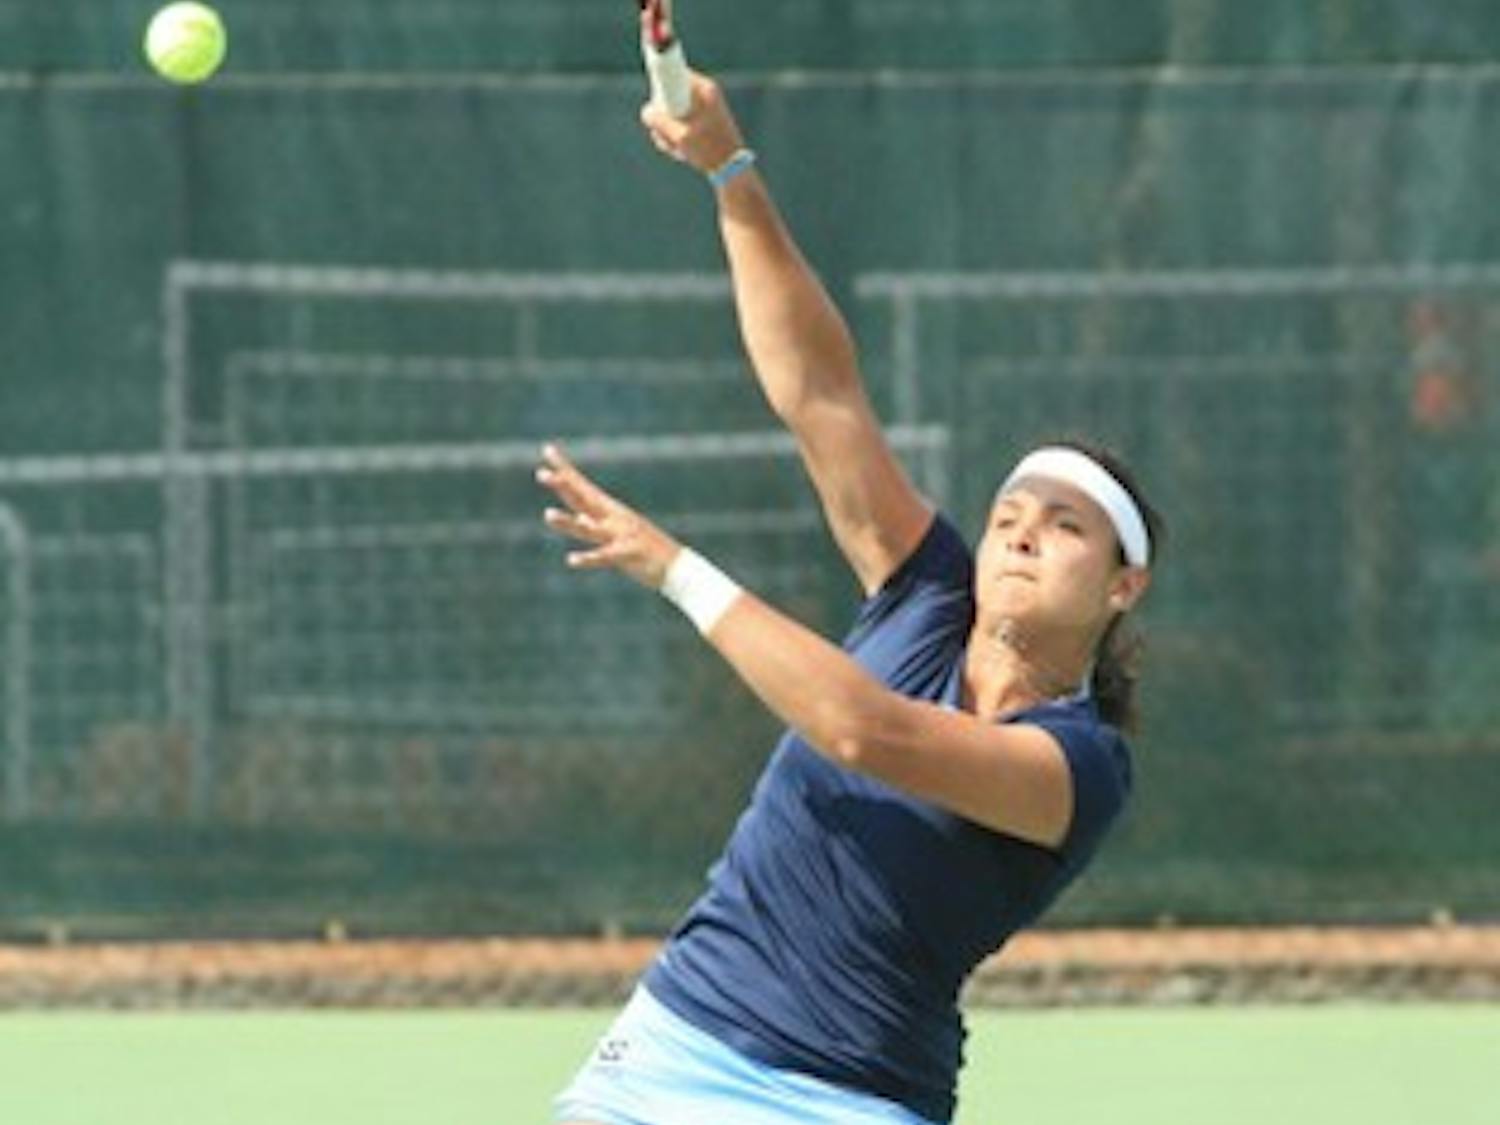 Wednesday's match between UNC Women's Tennis against N.C. State Wolfpack